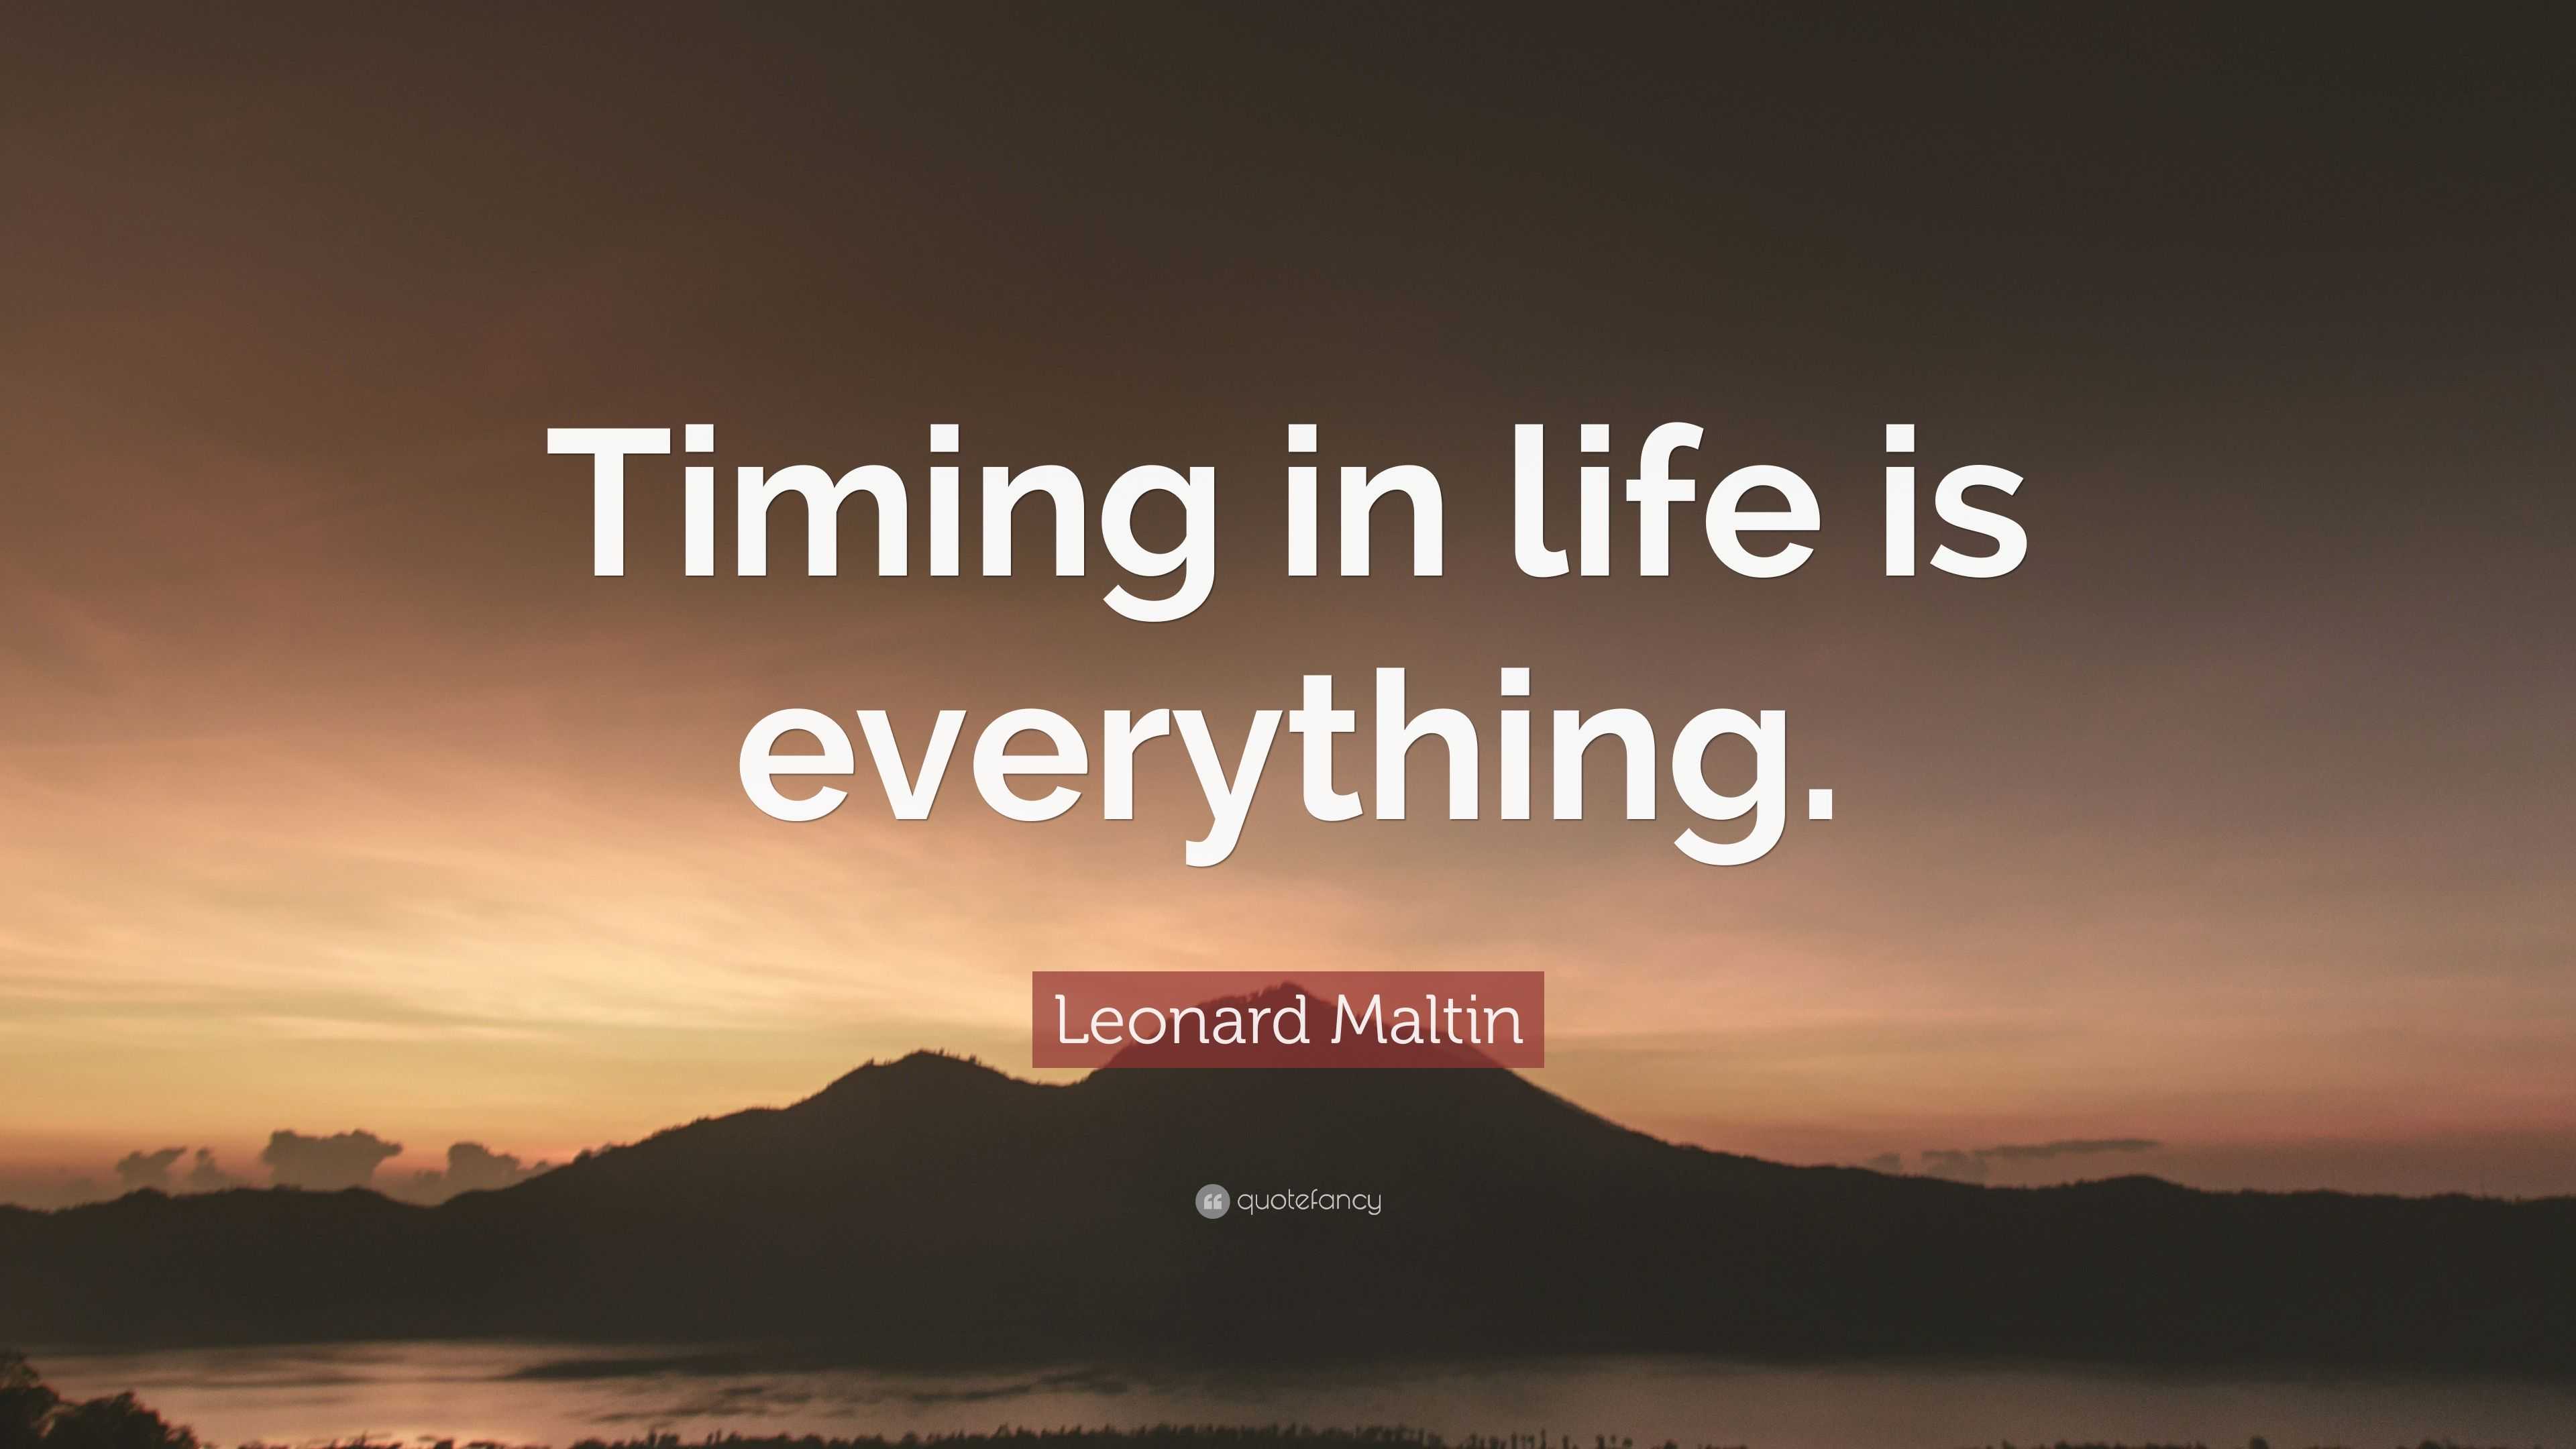 Timing is everything quote by Leonard Maltin